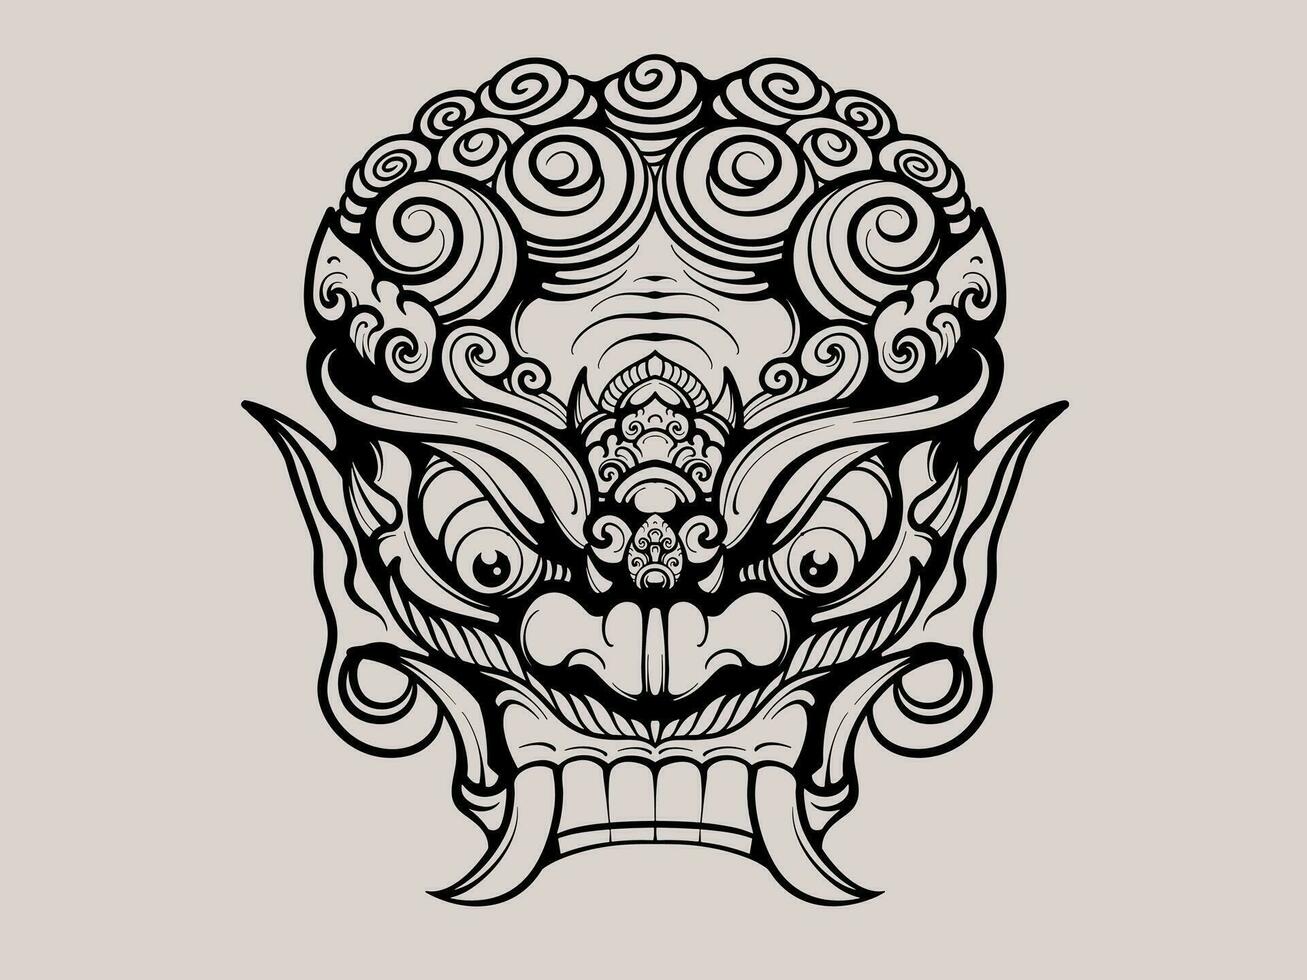 Traditional Balinese Mask illustration vector